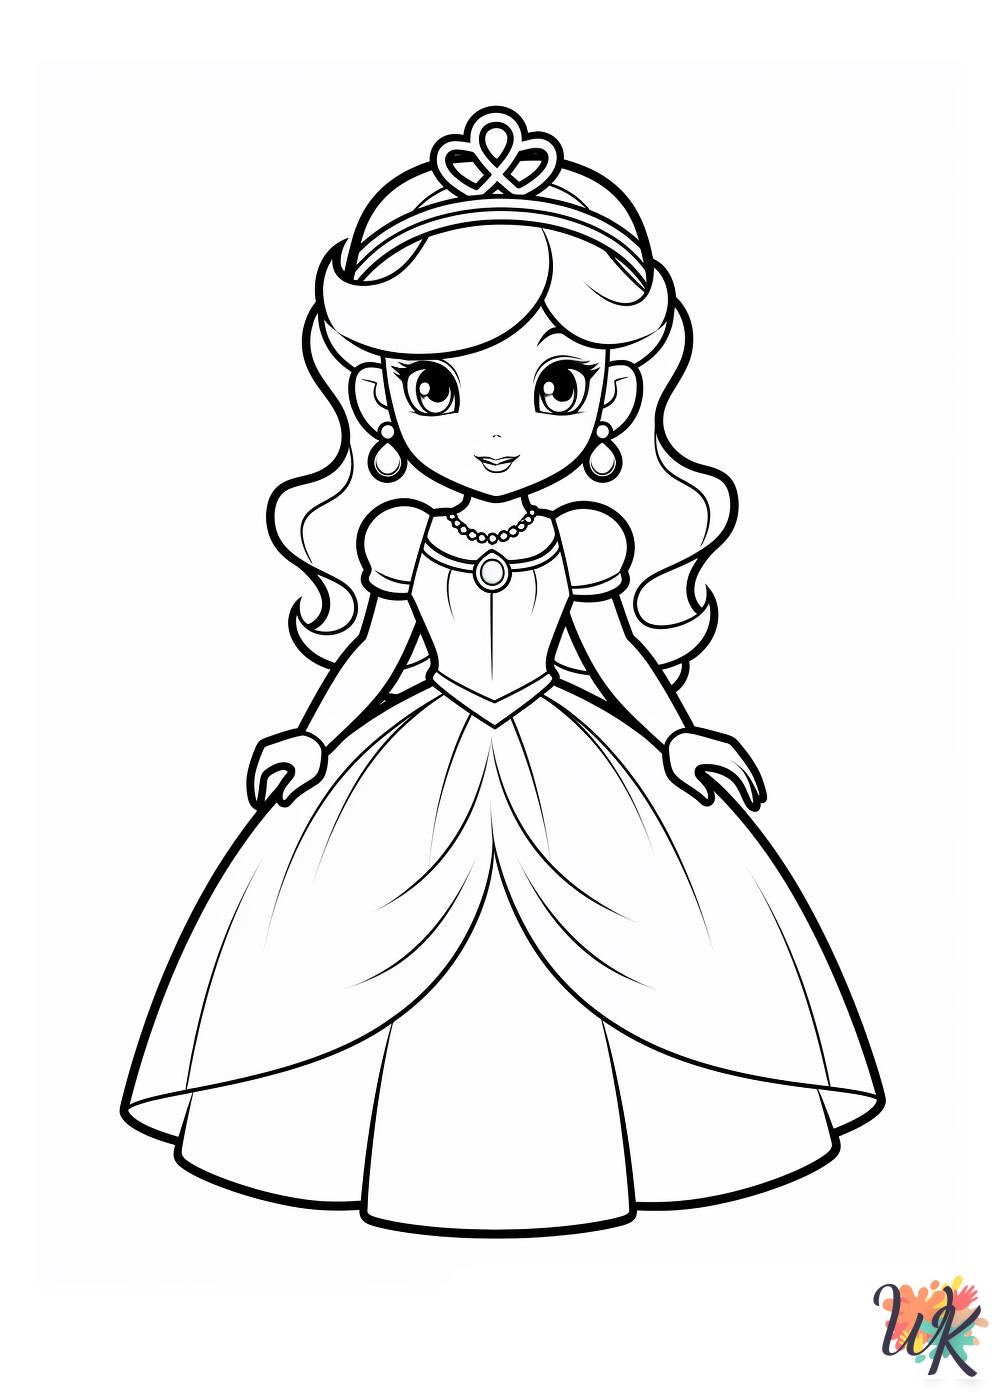 free Princess Peach coloring pages for adults